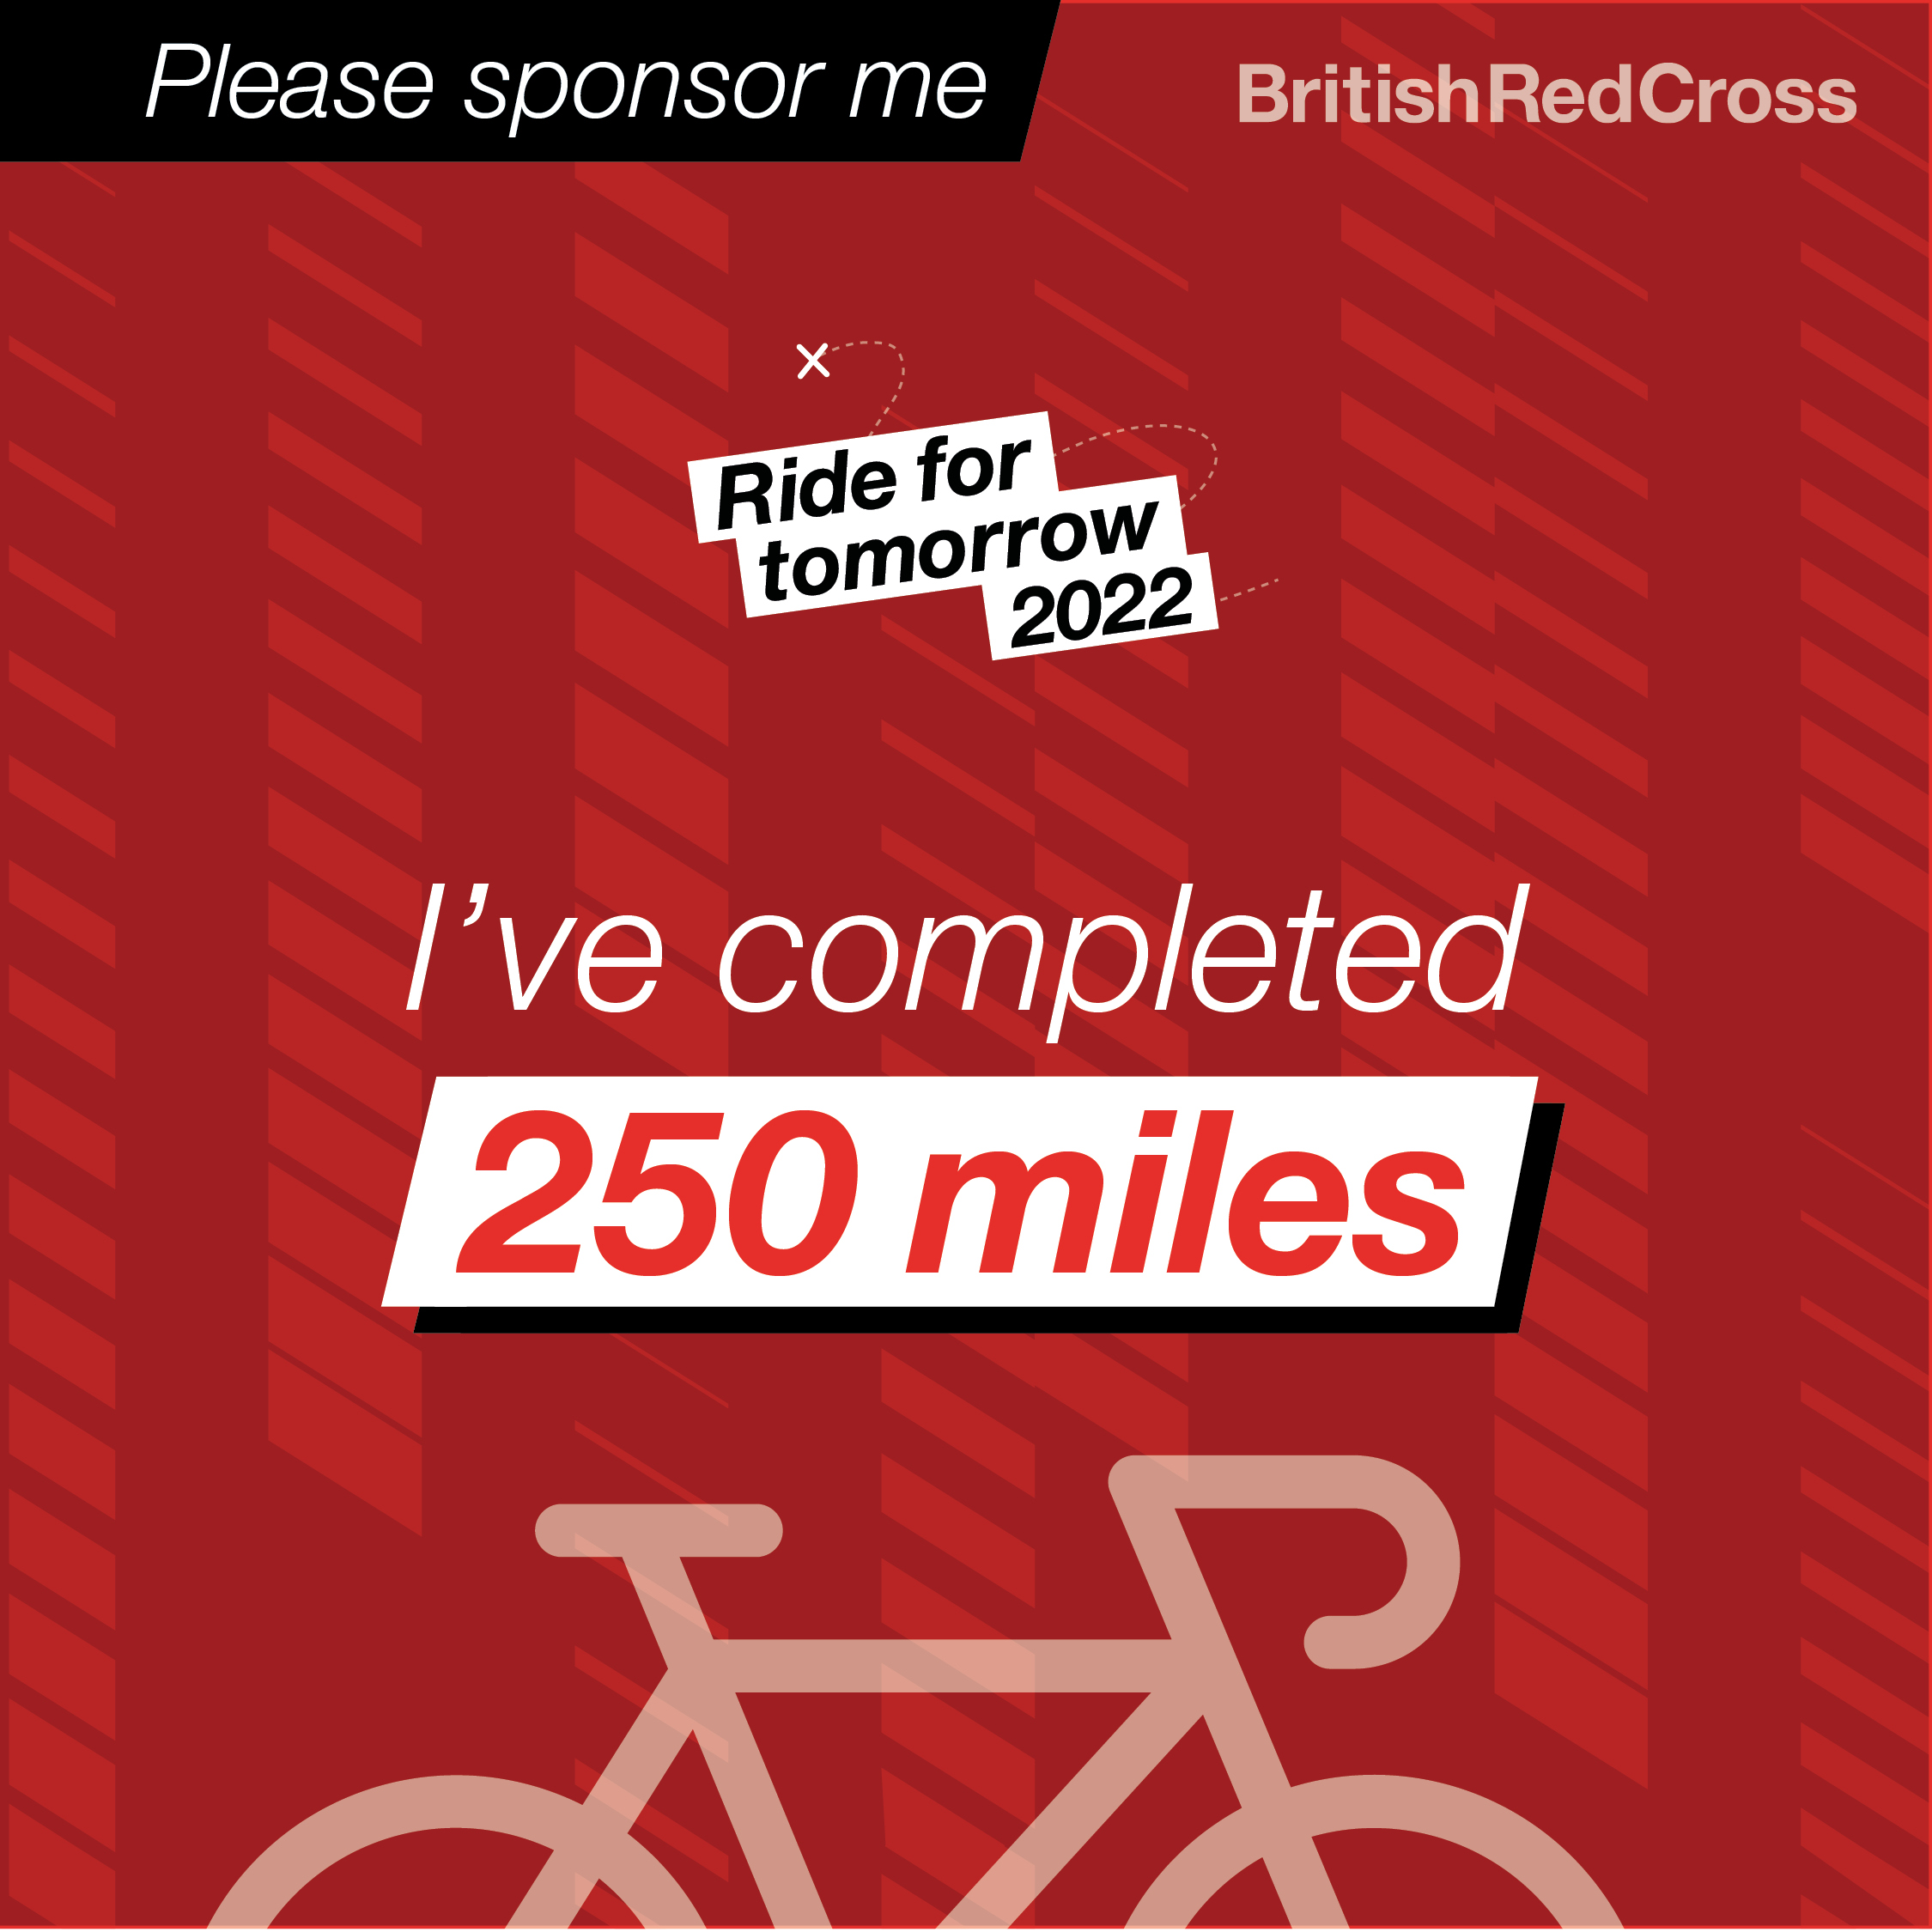 Please sponsor me. I've completed 250 miles. Text shown above a red bike on a red background.